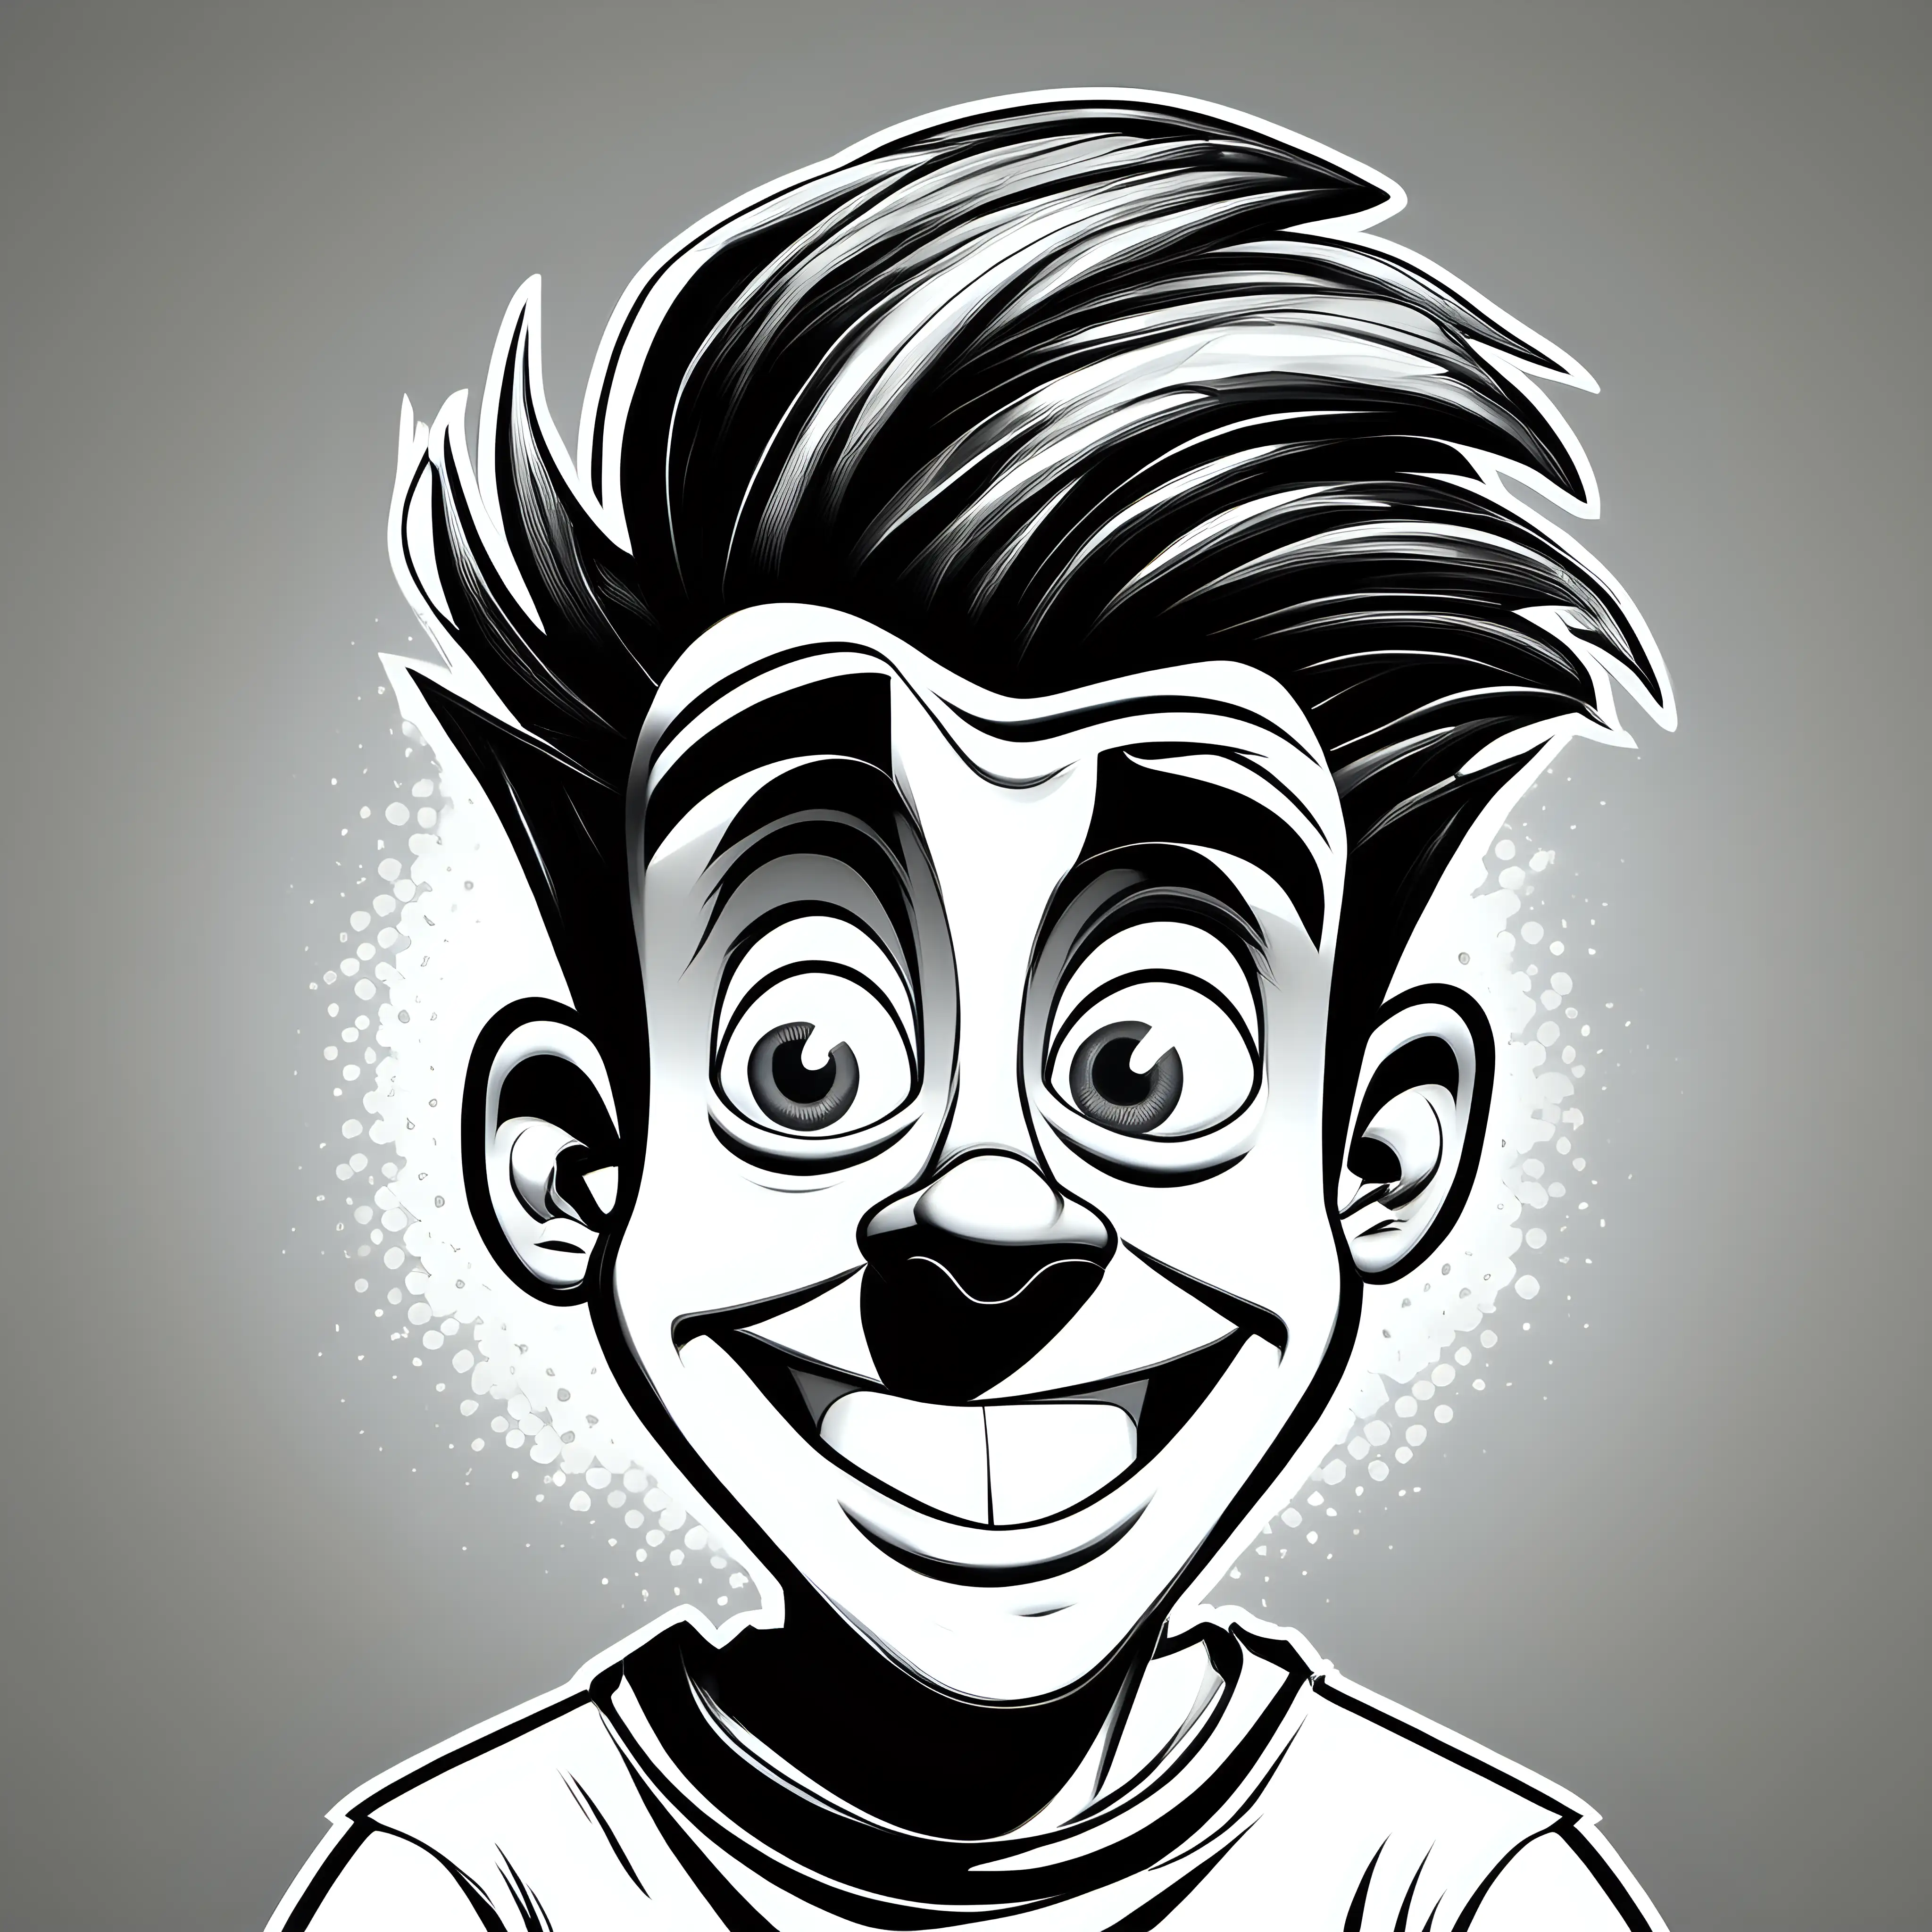 Whimsical Black and White Cartoon Portrait Playful Young Man in Iconic Pop Culture Style